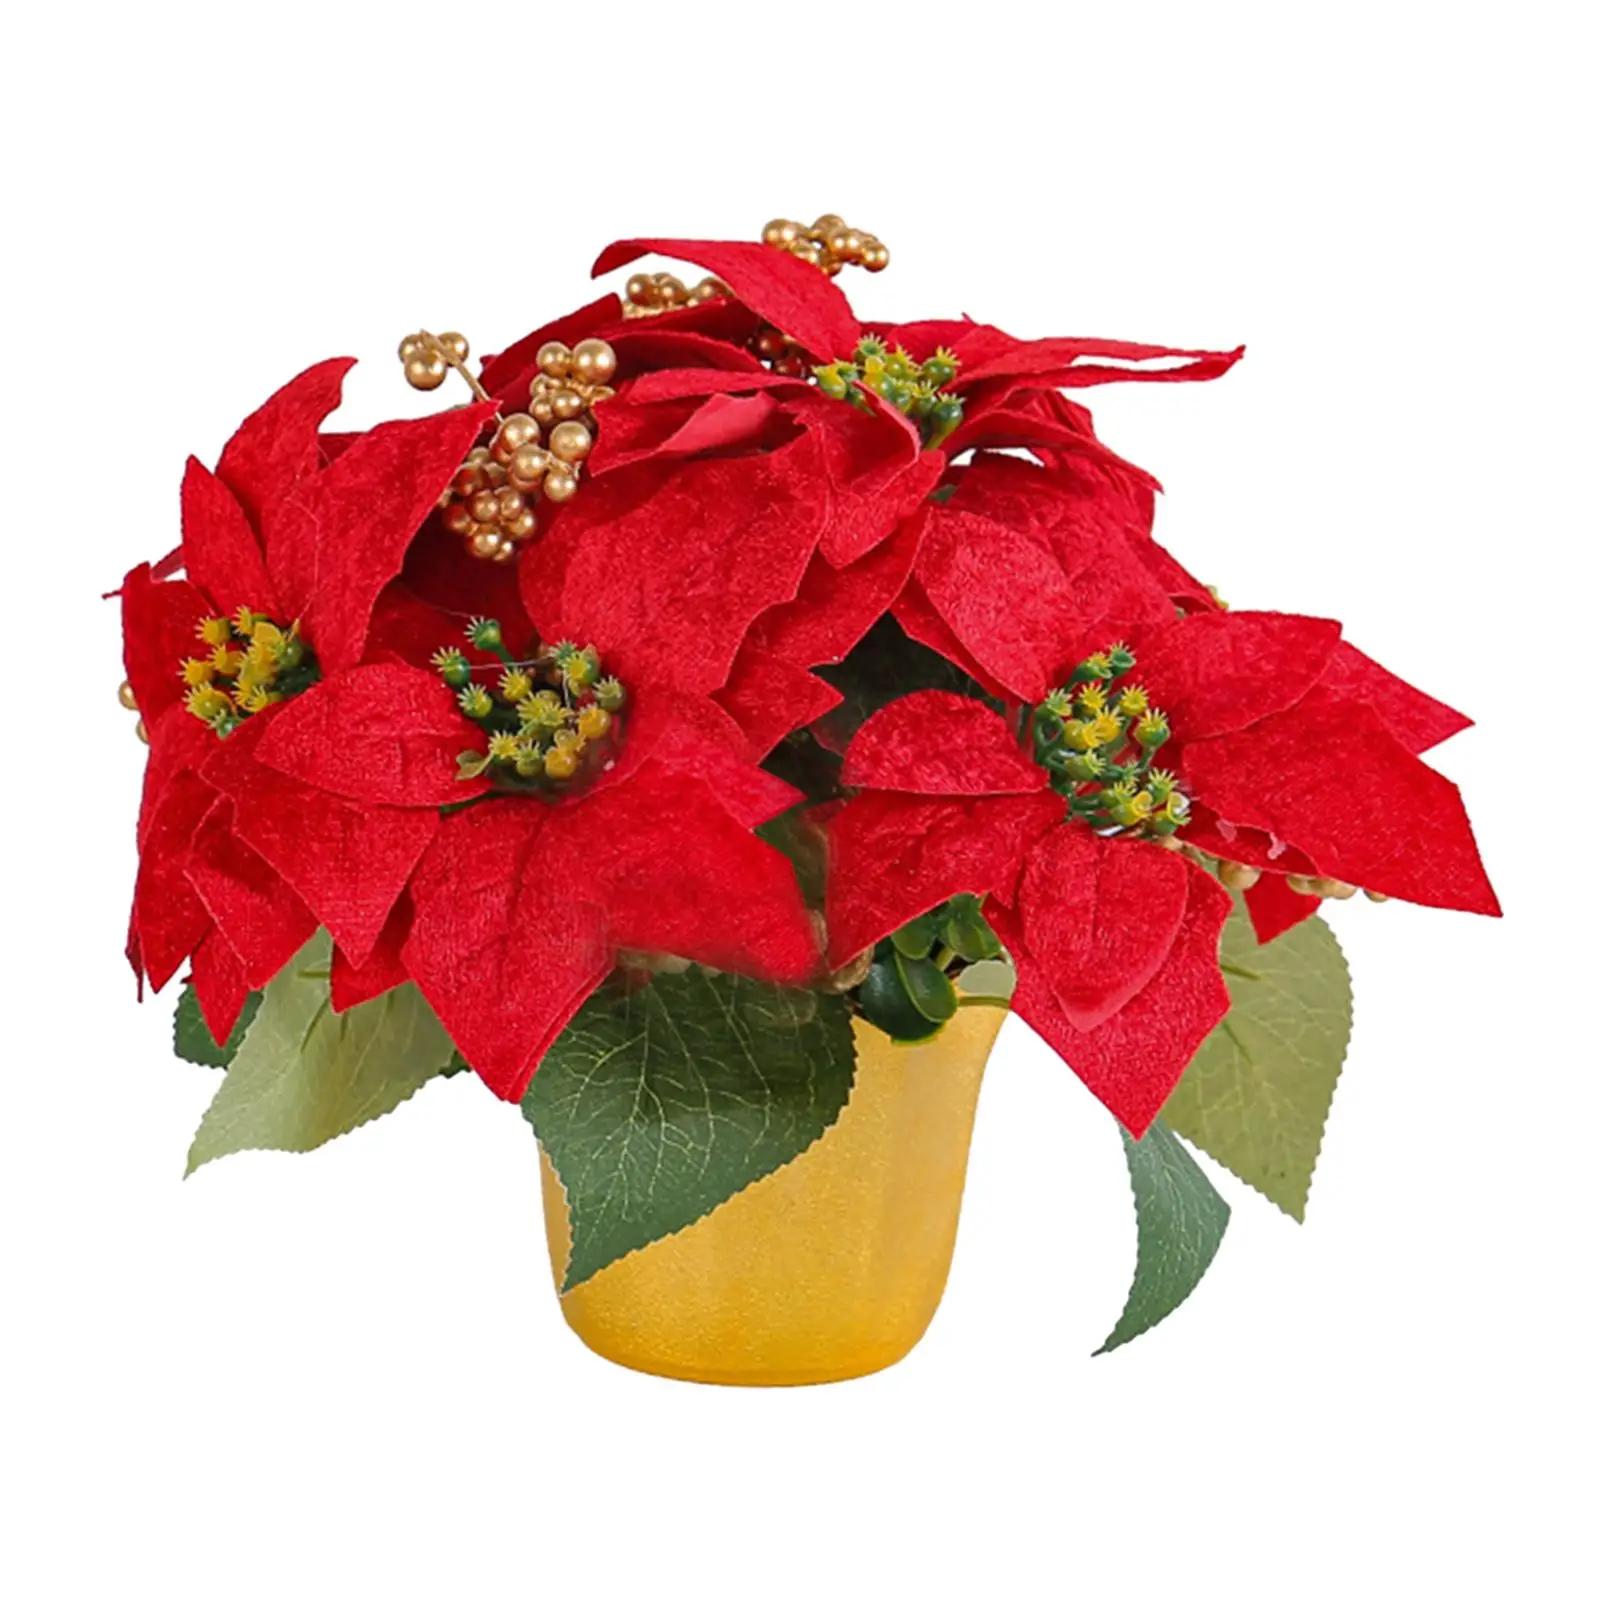 Potted Red Poinsettia Plant Christmas Artificial Poinsettia Plant Ornament for Desk Office Festival Indoor Table Centerpiece